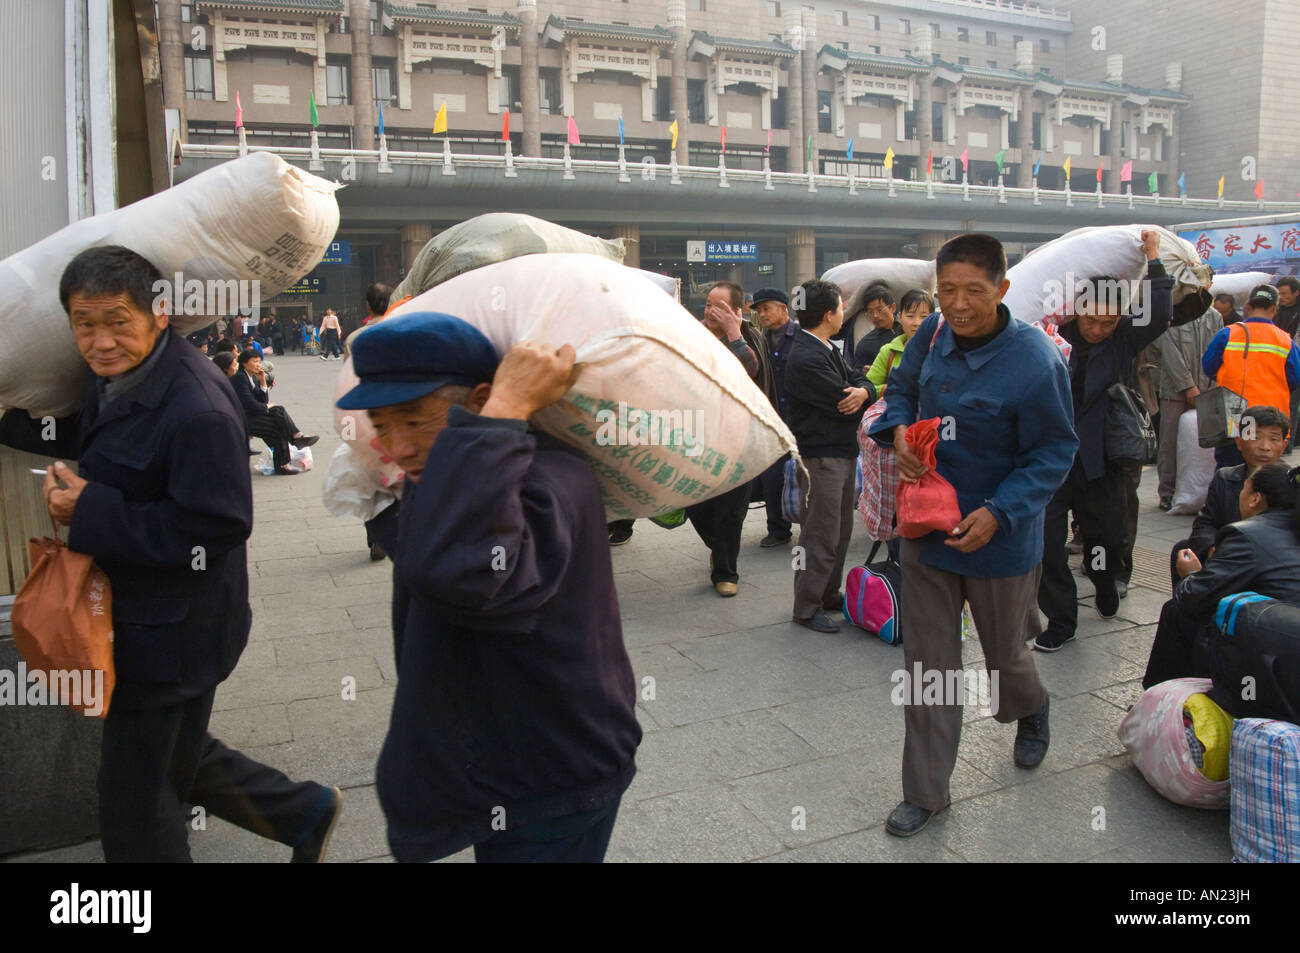 China beijing Fengtai Beijing West railway Station Front courtyard group of men carrying bulky bags with atation in bkgd Stock Photo